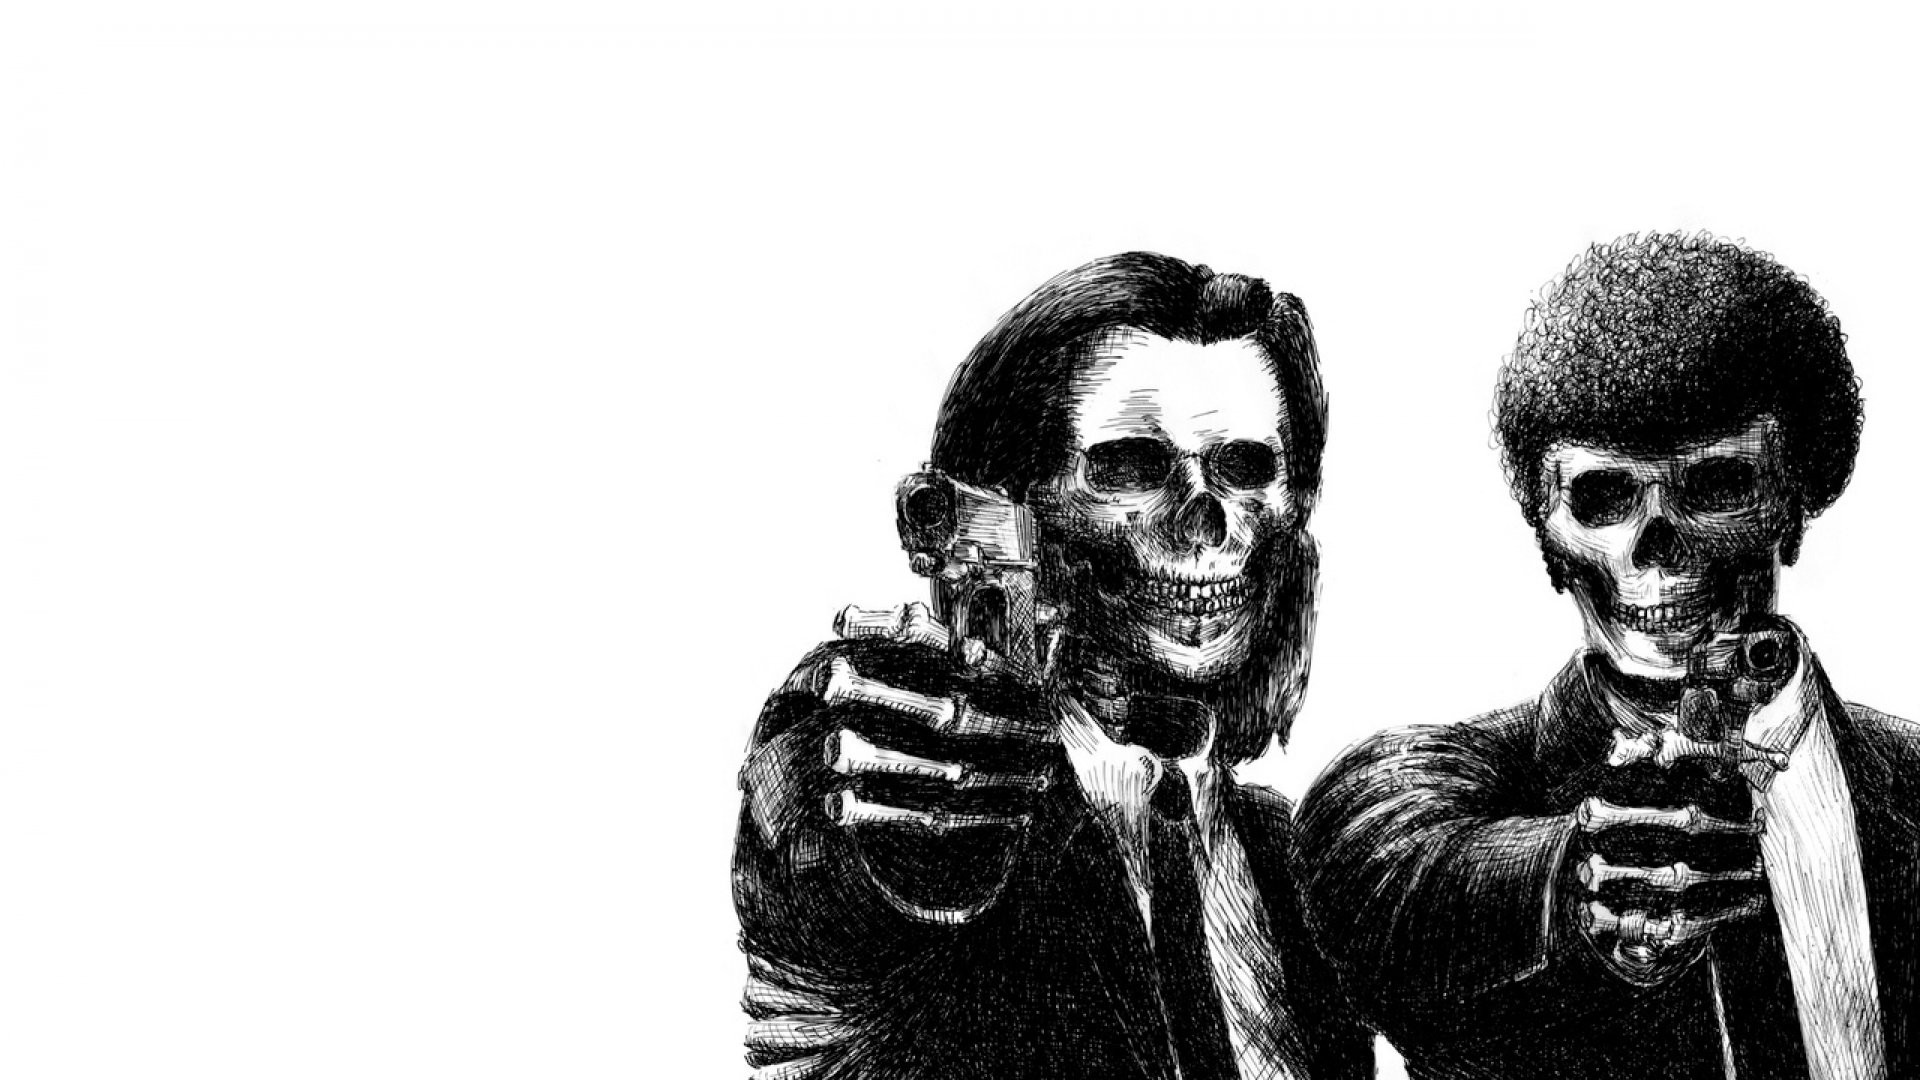 General 1920x1080 movies simple background skull drawing white background Pulp Fiction fan art monochrome gun weapon